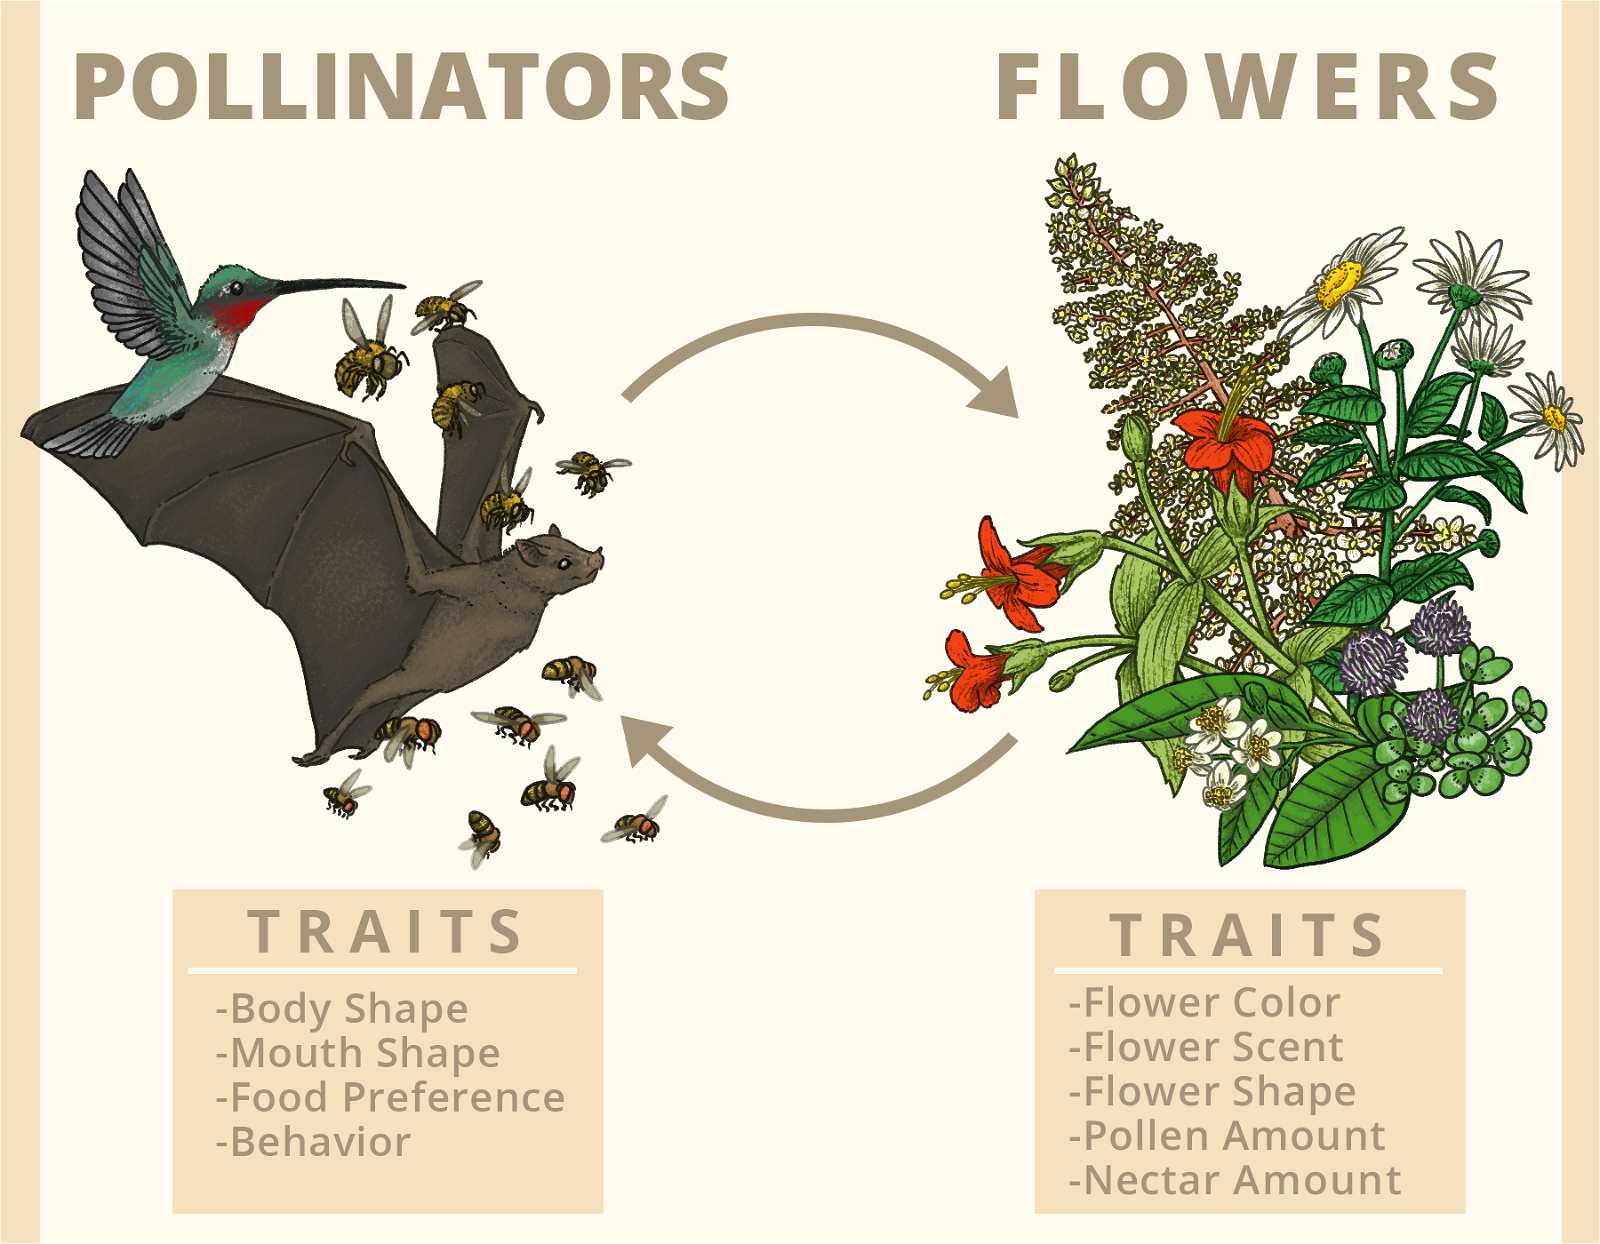 Why Flowering Plants Are So Diverse